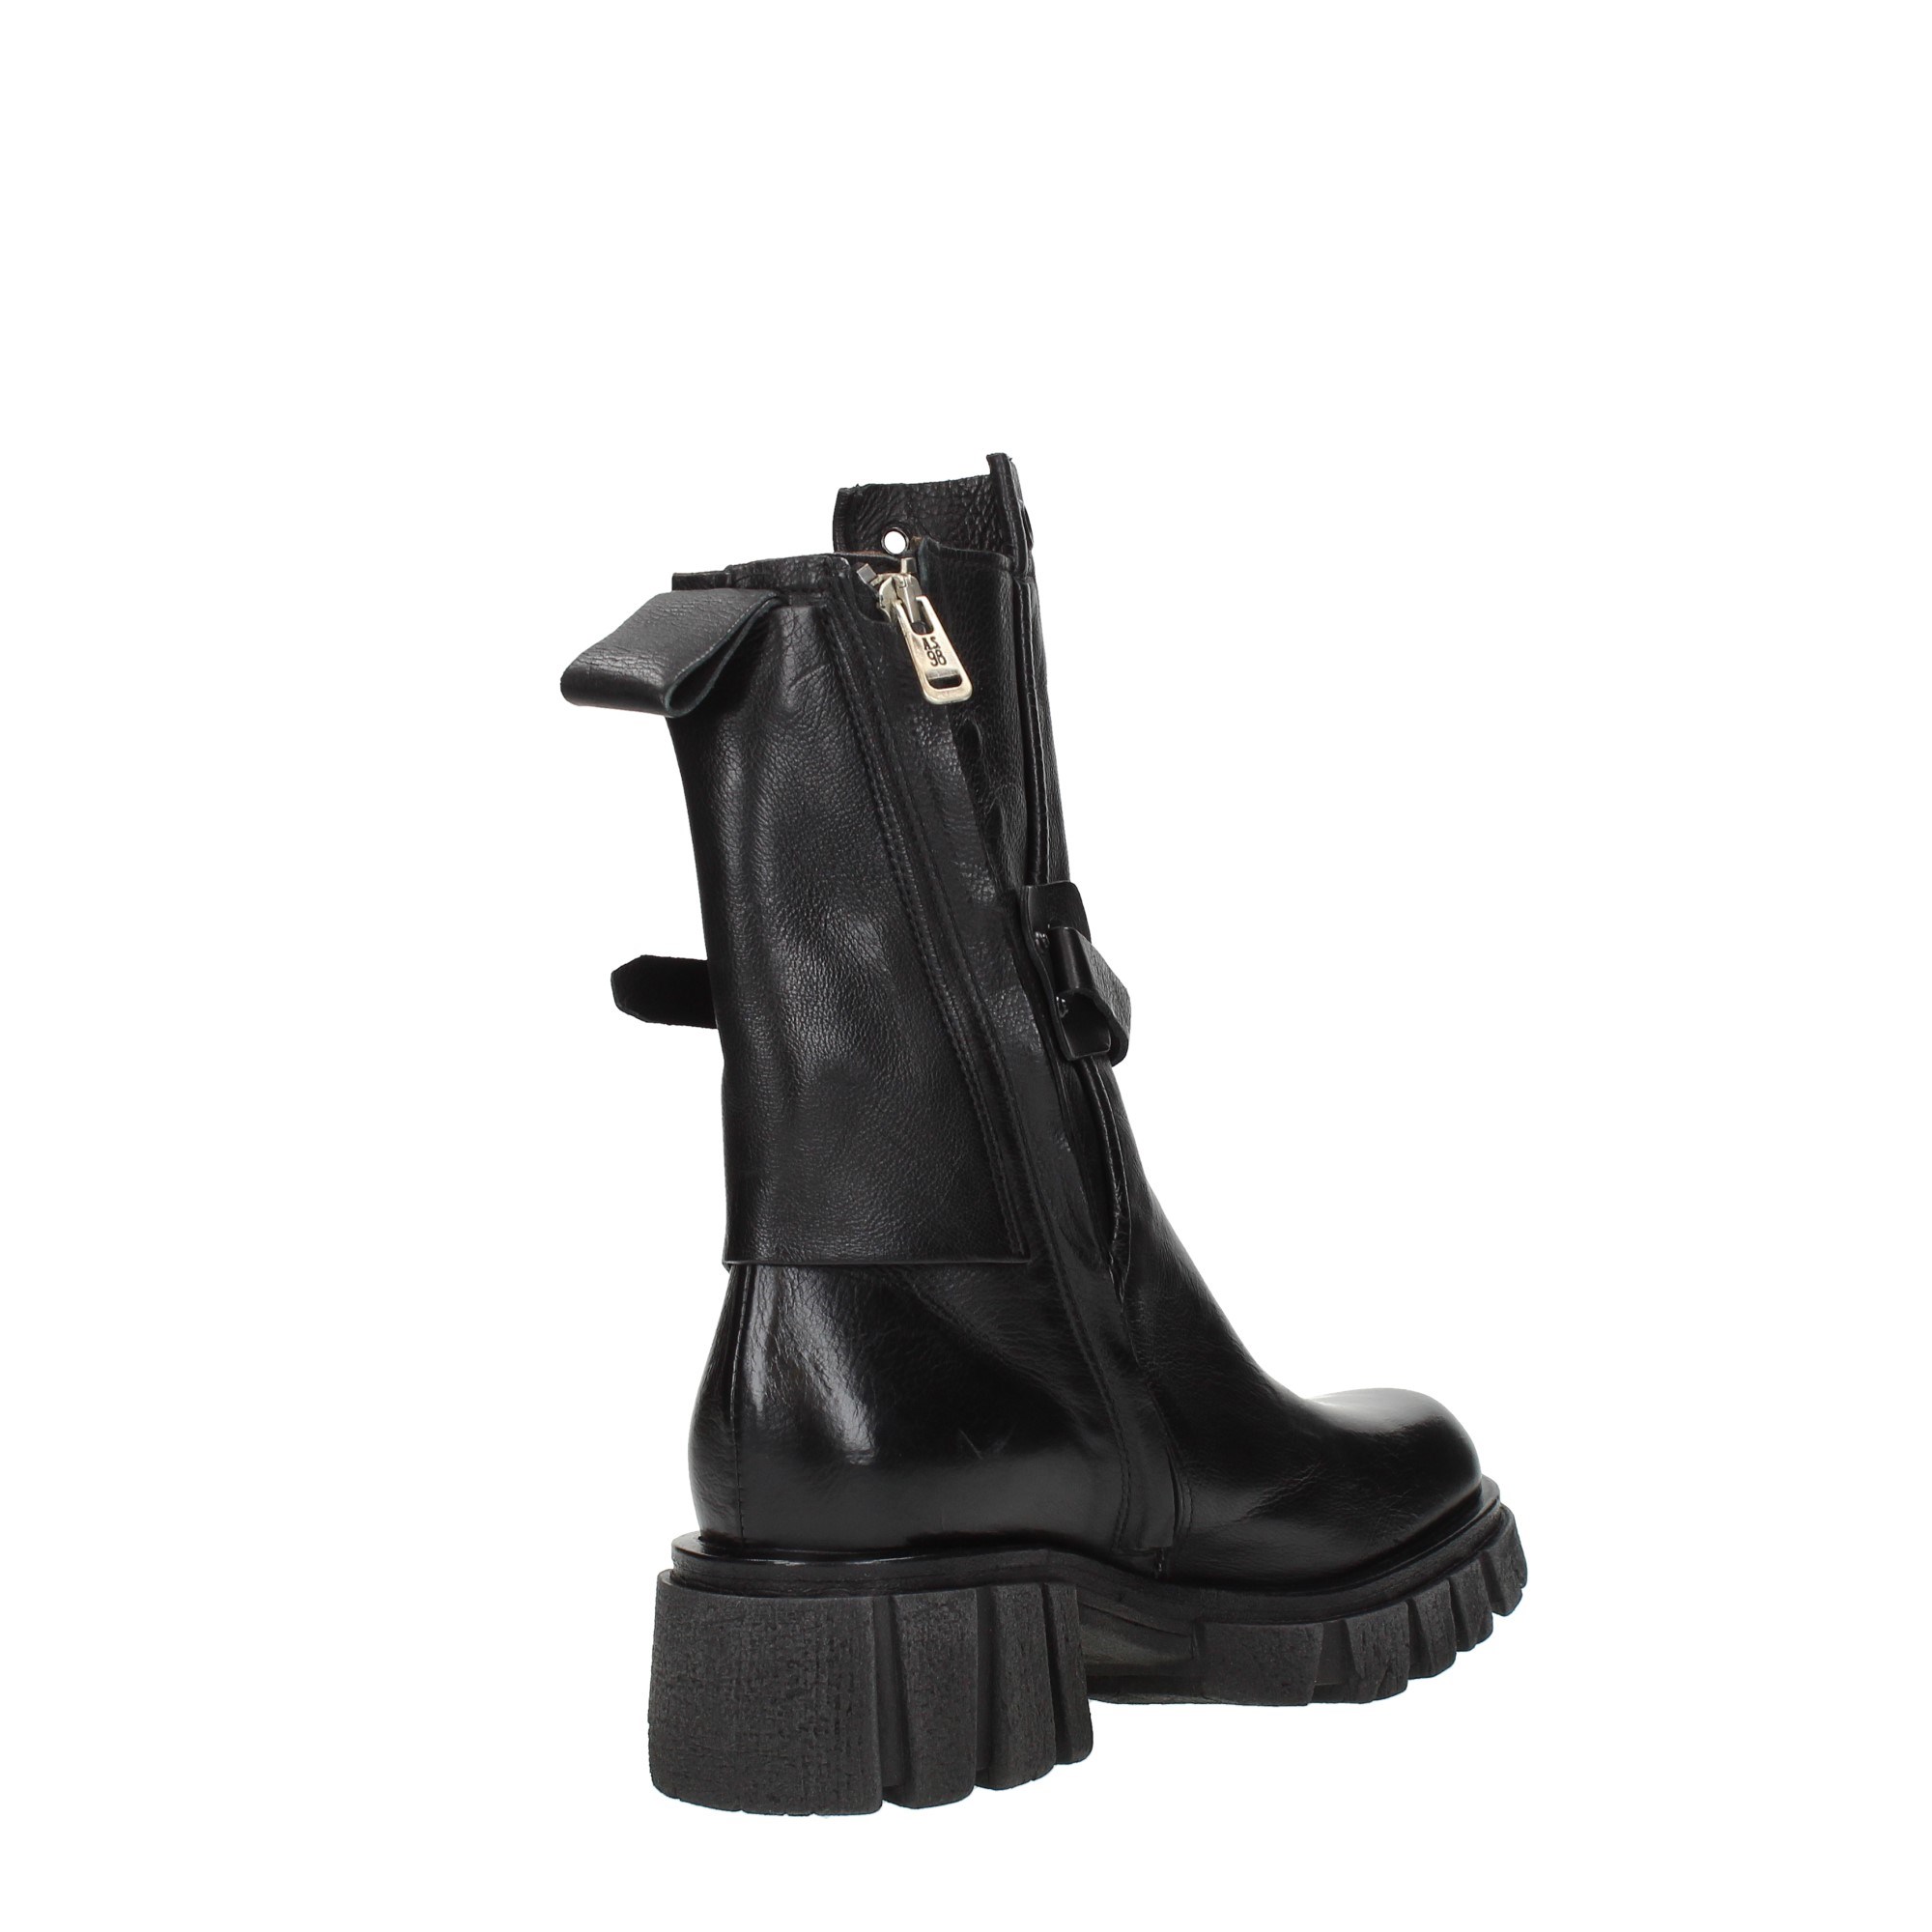 As98 Shoes Women Booties Black A54202